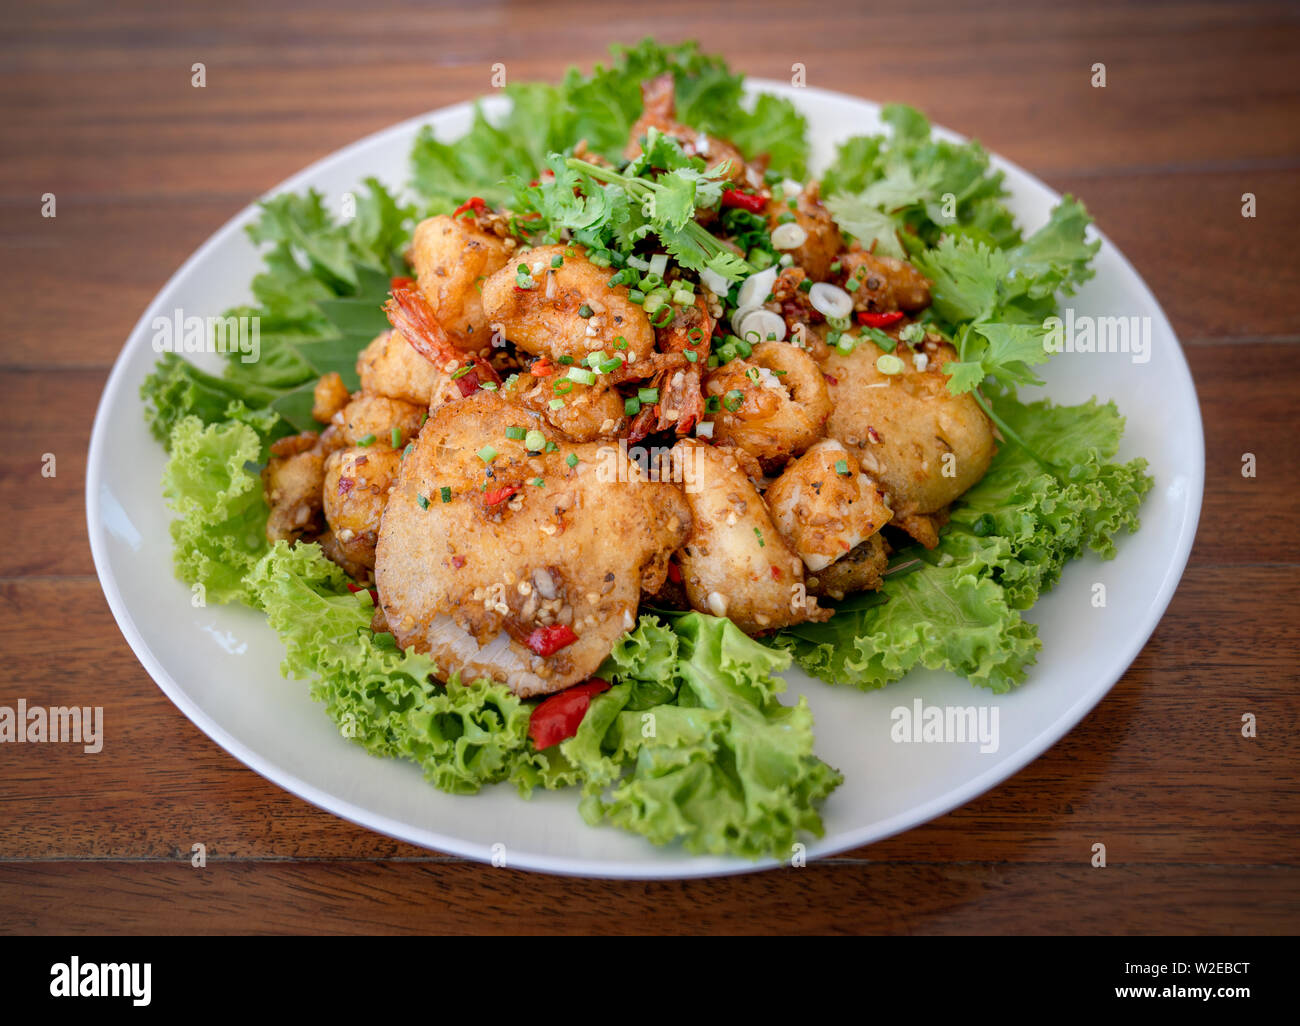 Fried Seafood shrimp prawn fish mussel squid fish on the salad vegetagle in white circle dish on wood table. Stock Photo